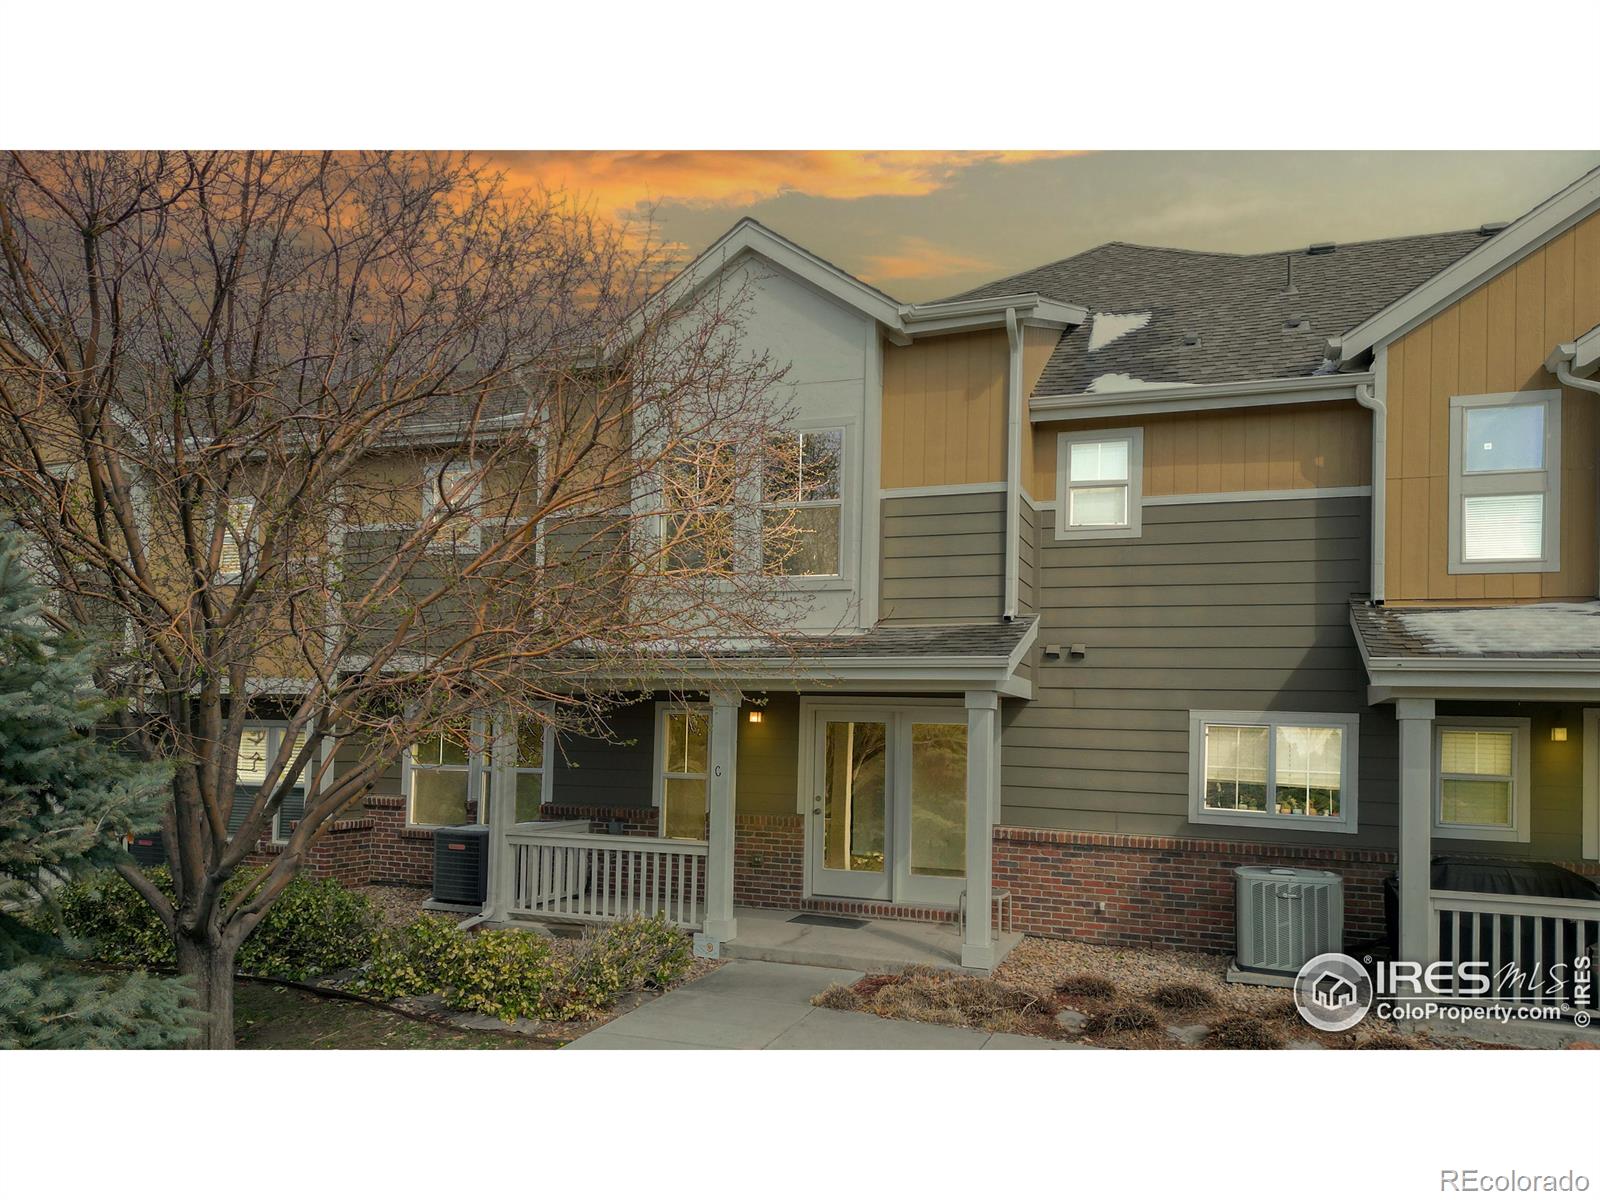 Report Image for 11844  Oak Hill Way,Commerce City, Colorado